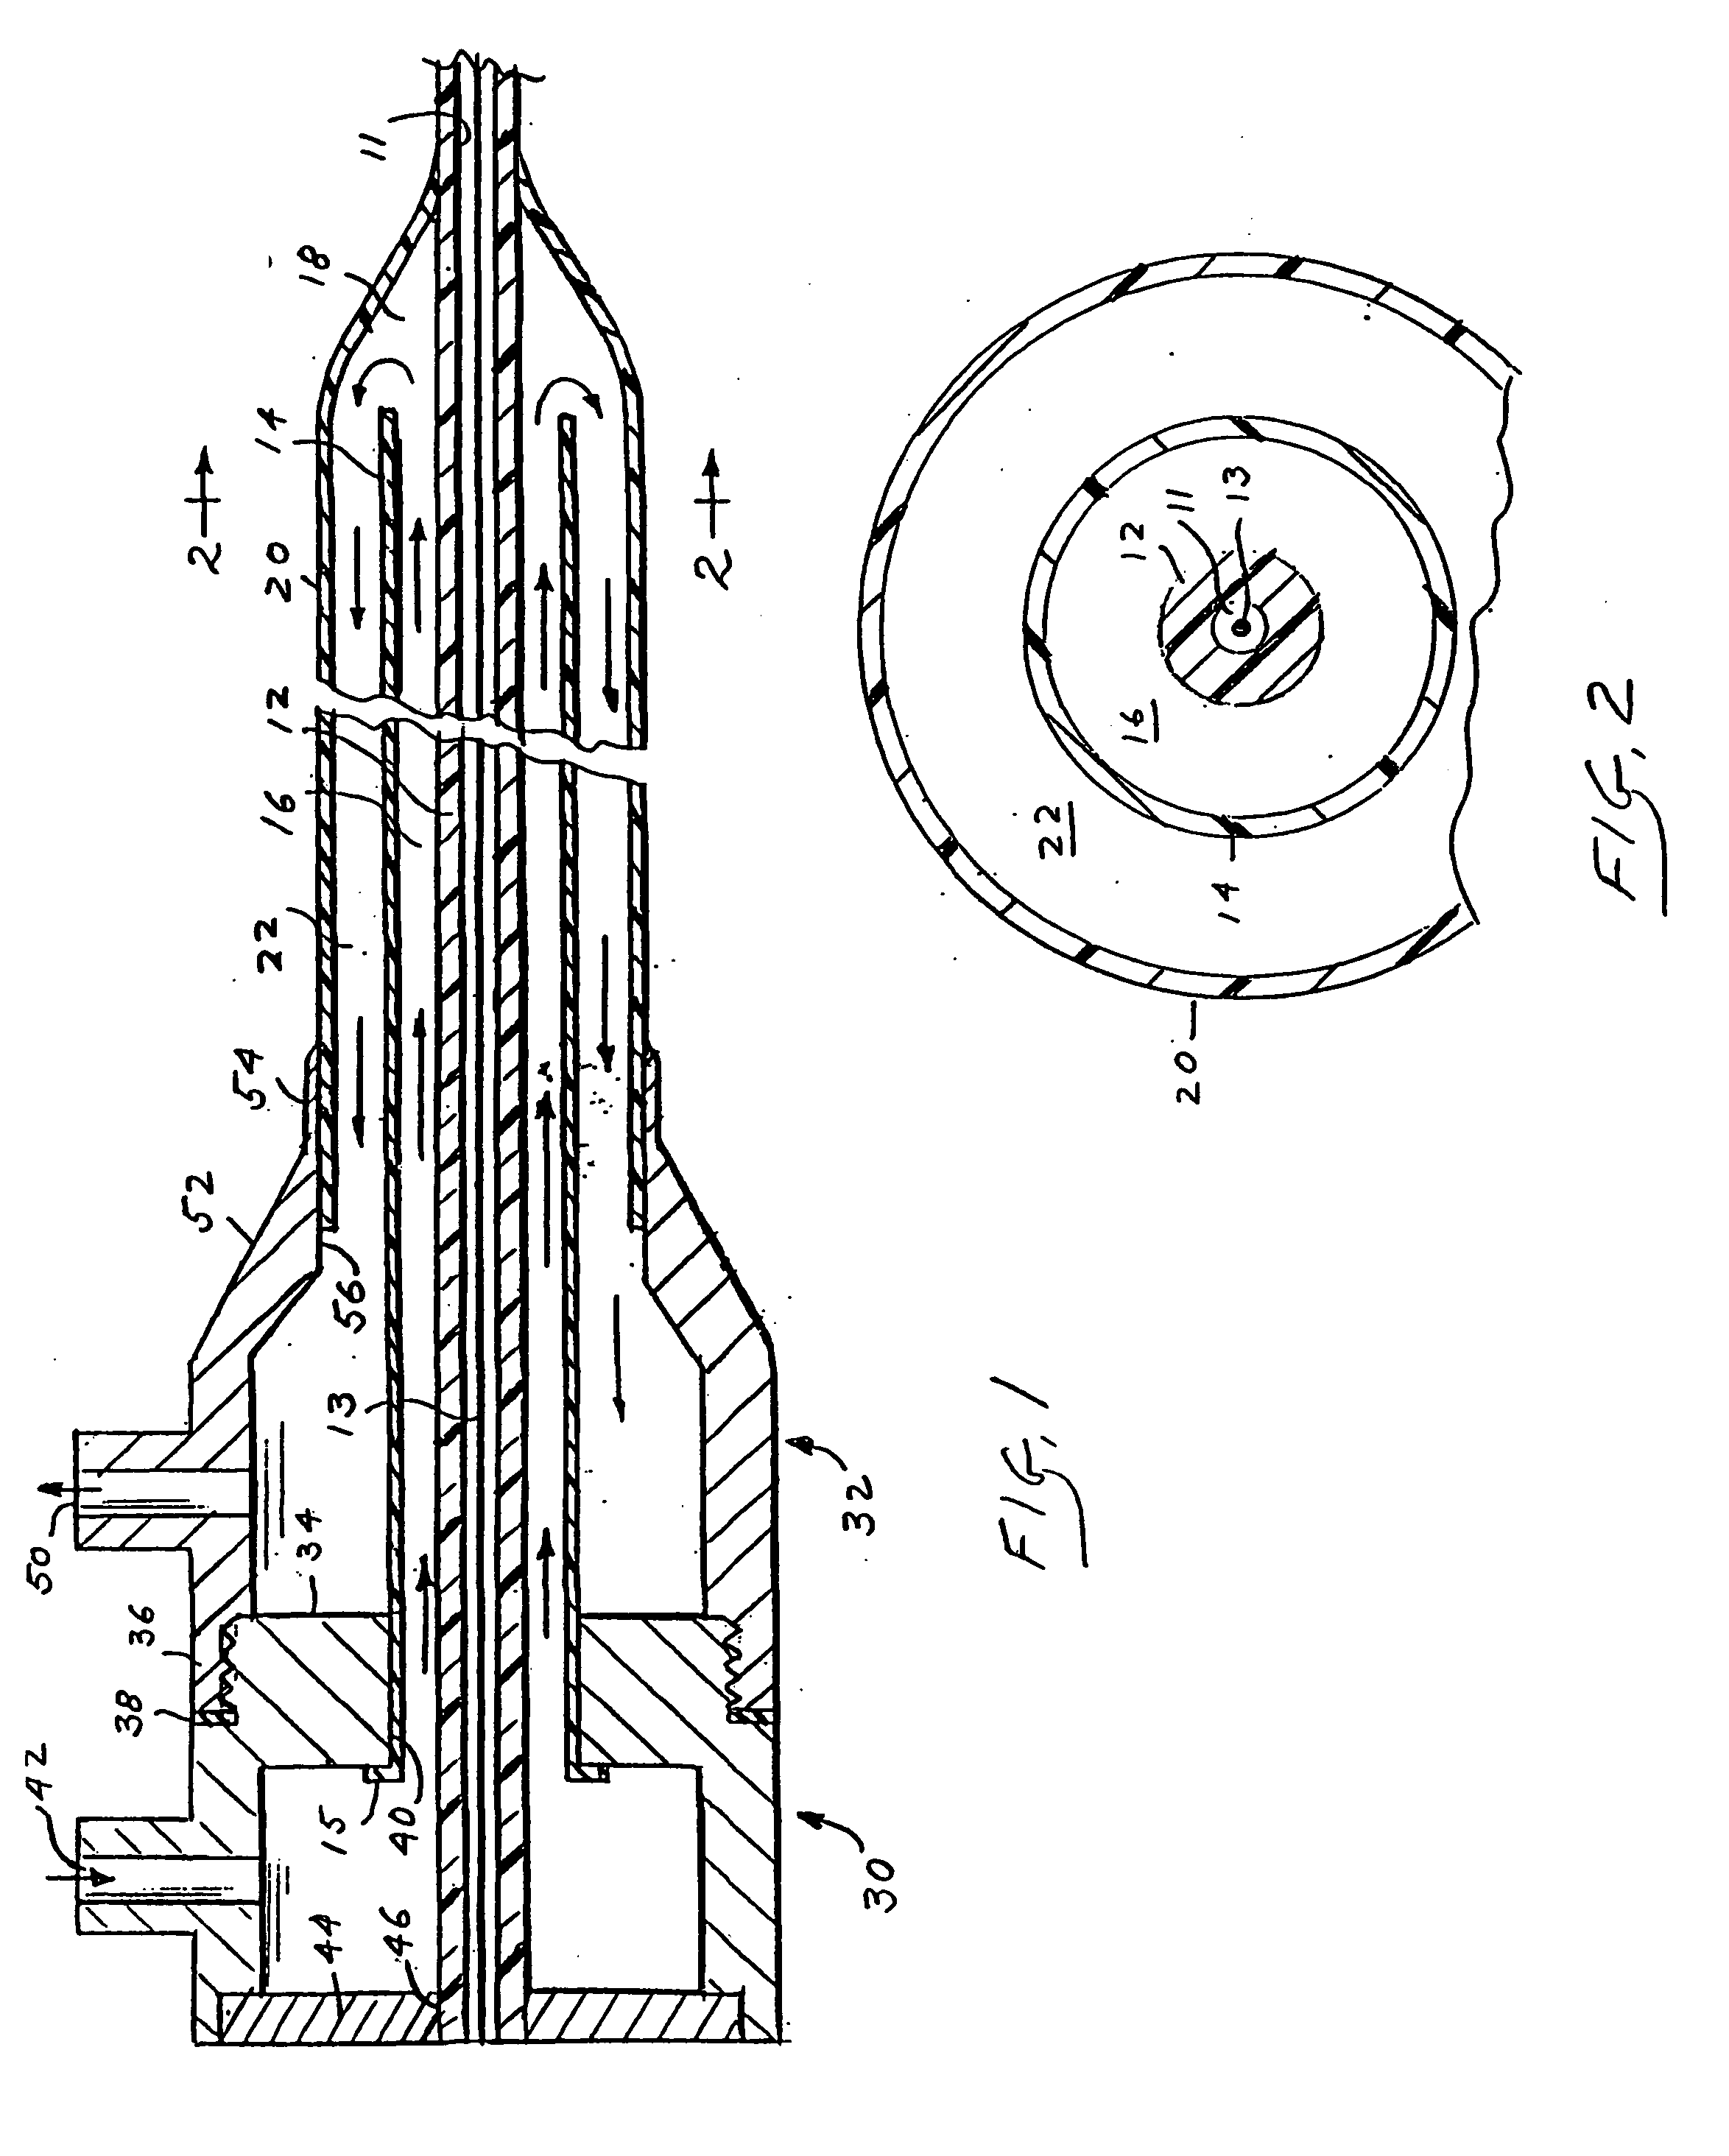 Heat transfer catheters and methods of making and using same